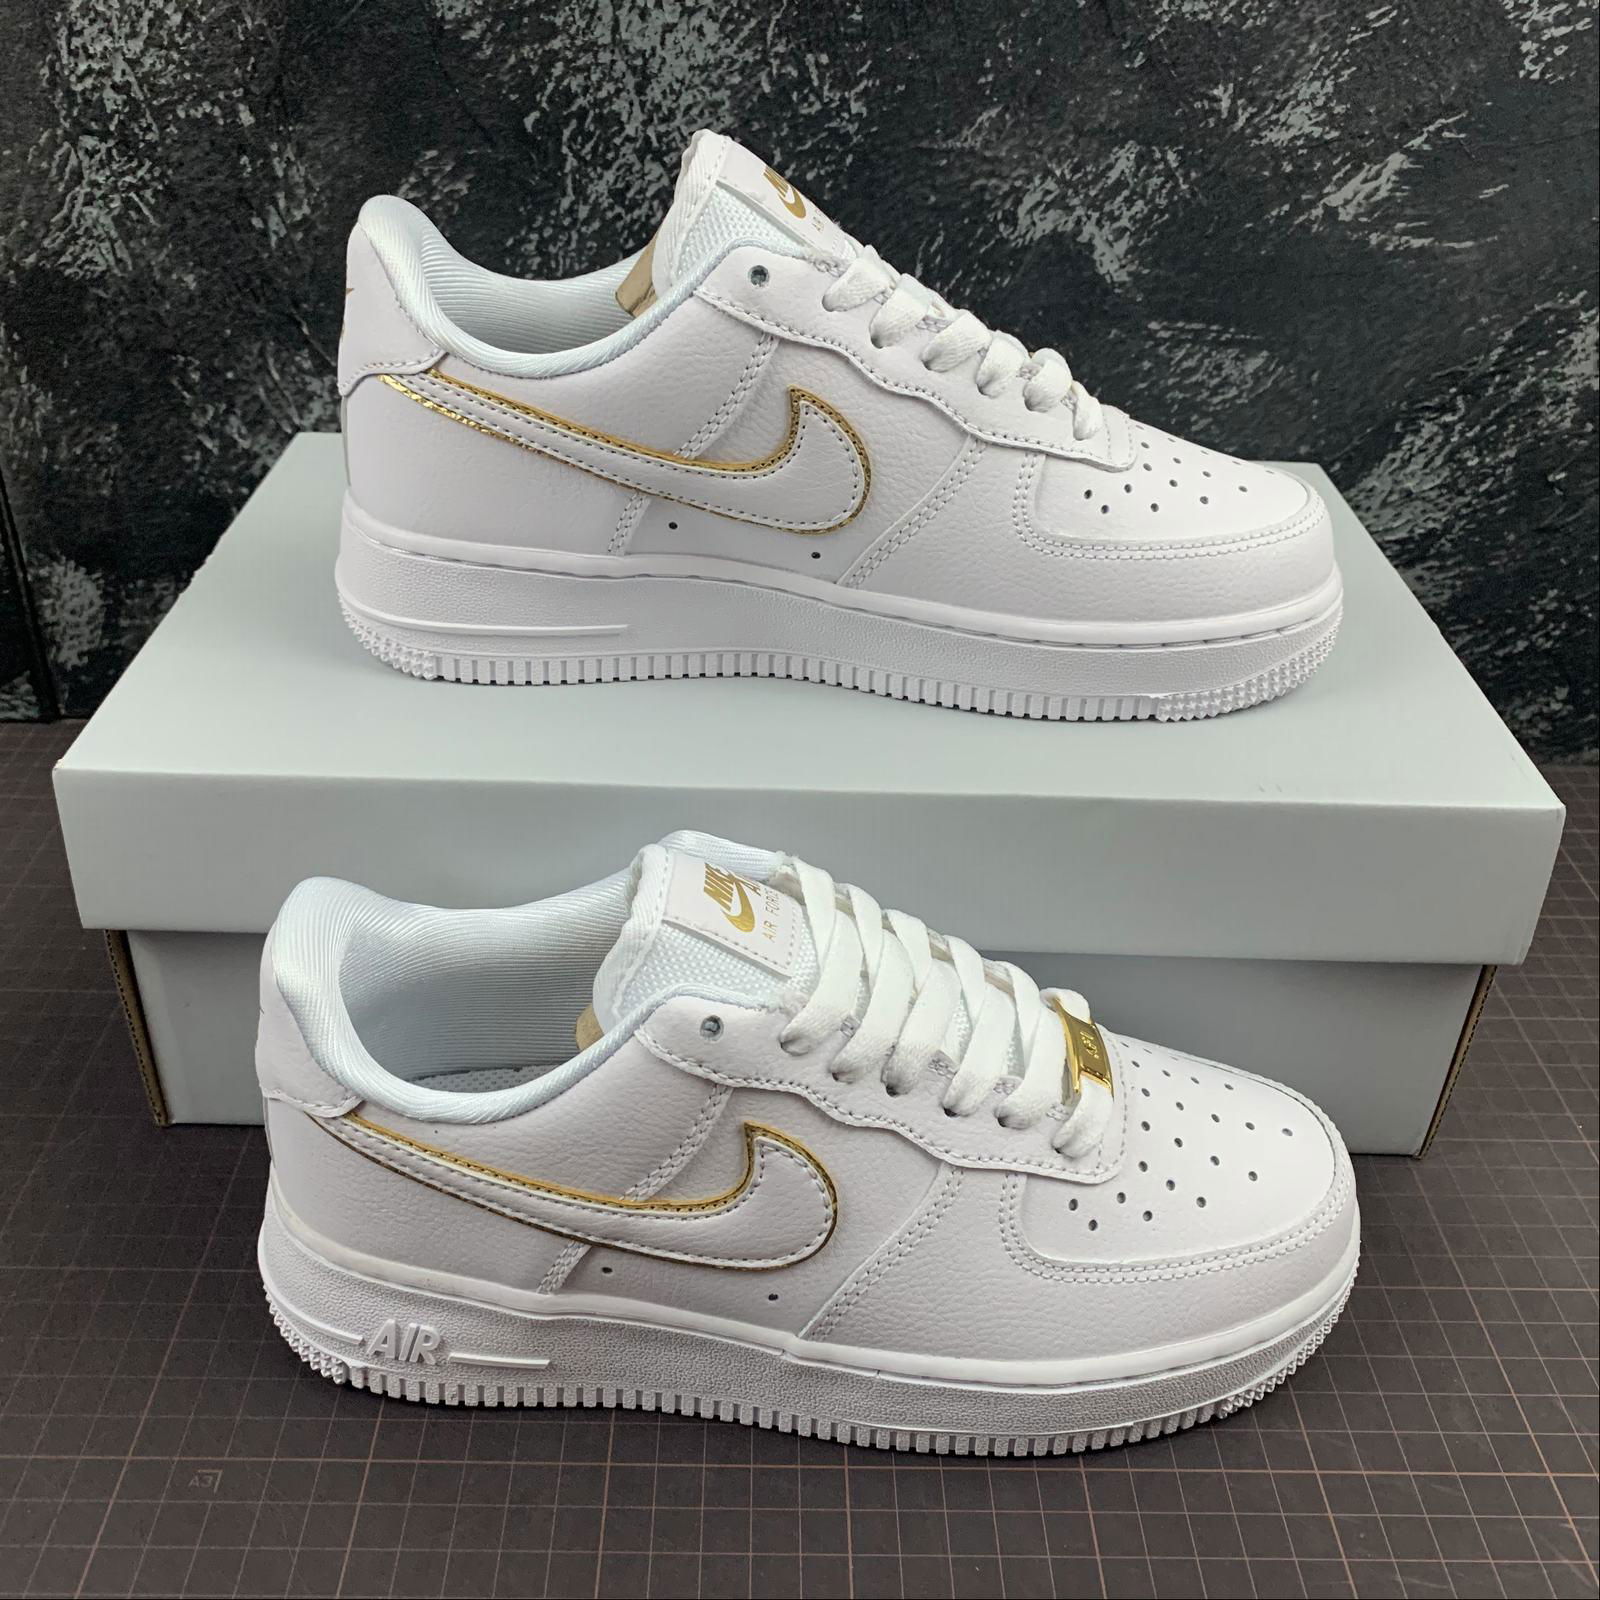 New Arrive top sport shoes Air Force 1 air max sneaker shoes (China ...